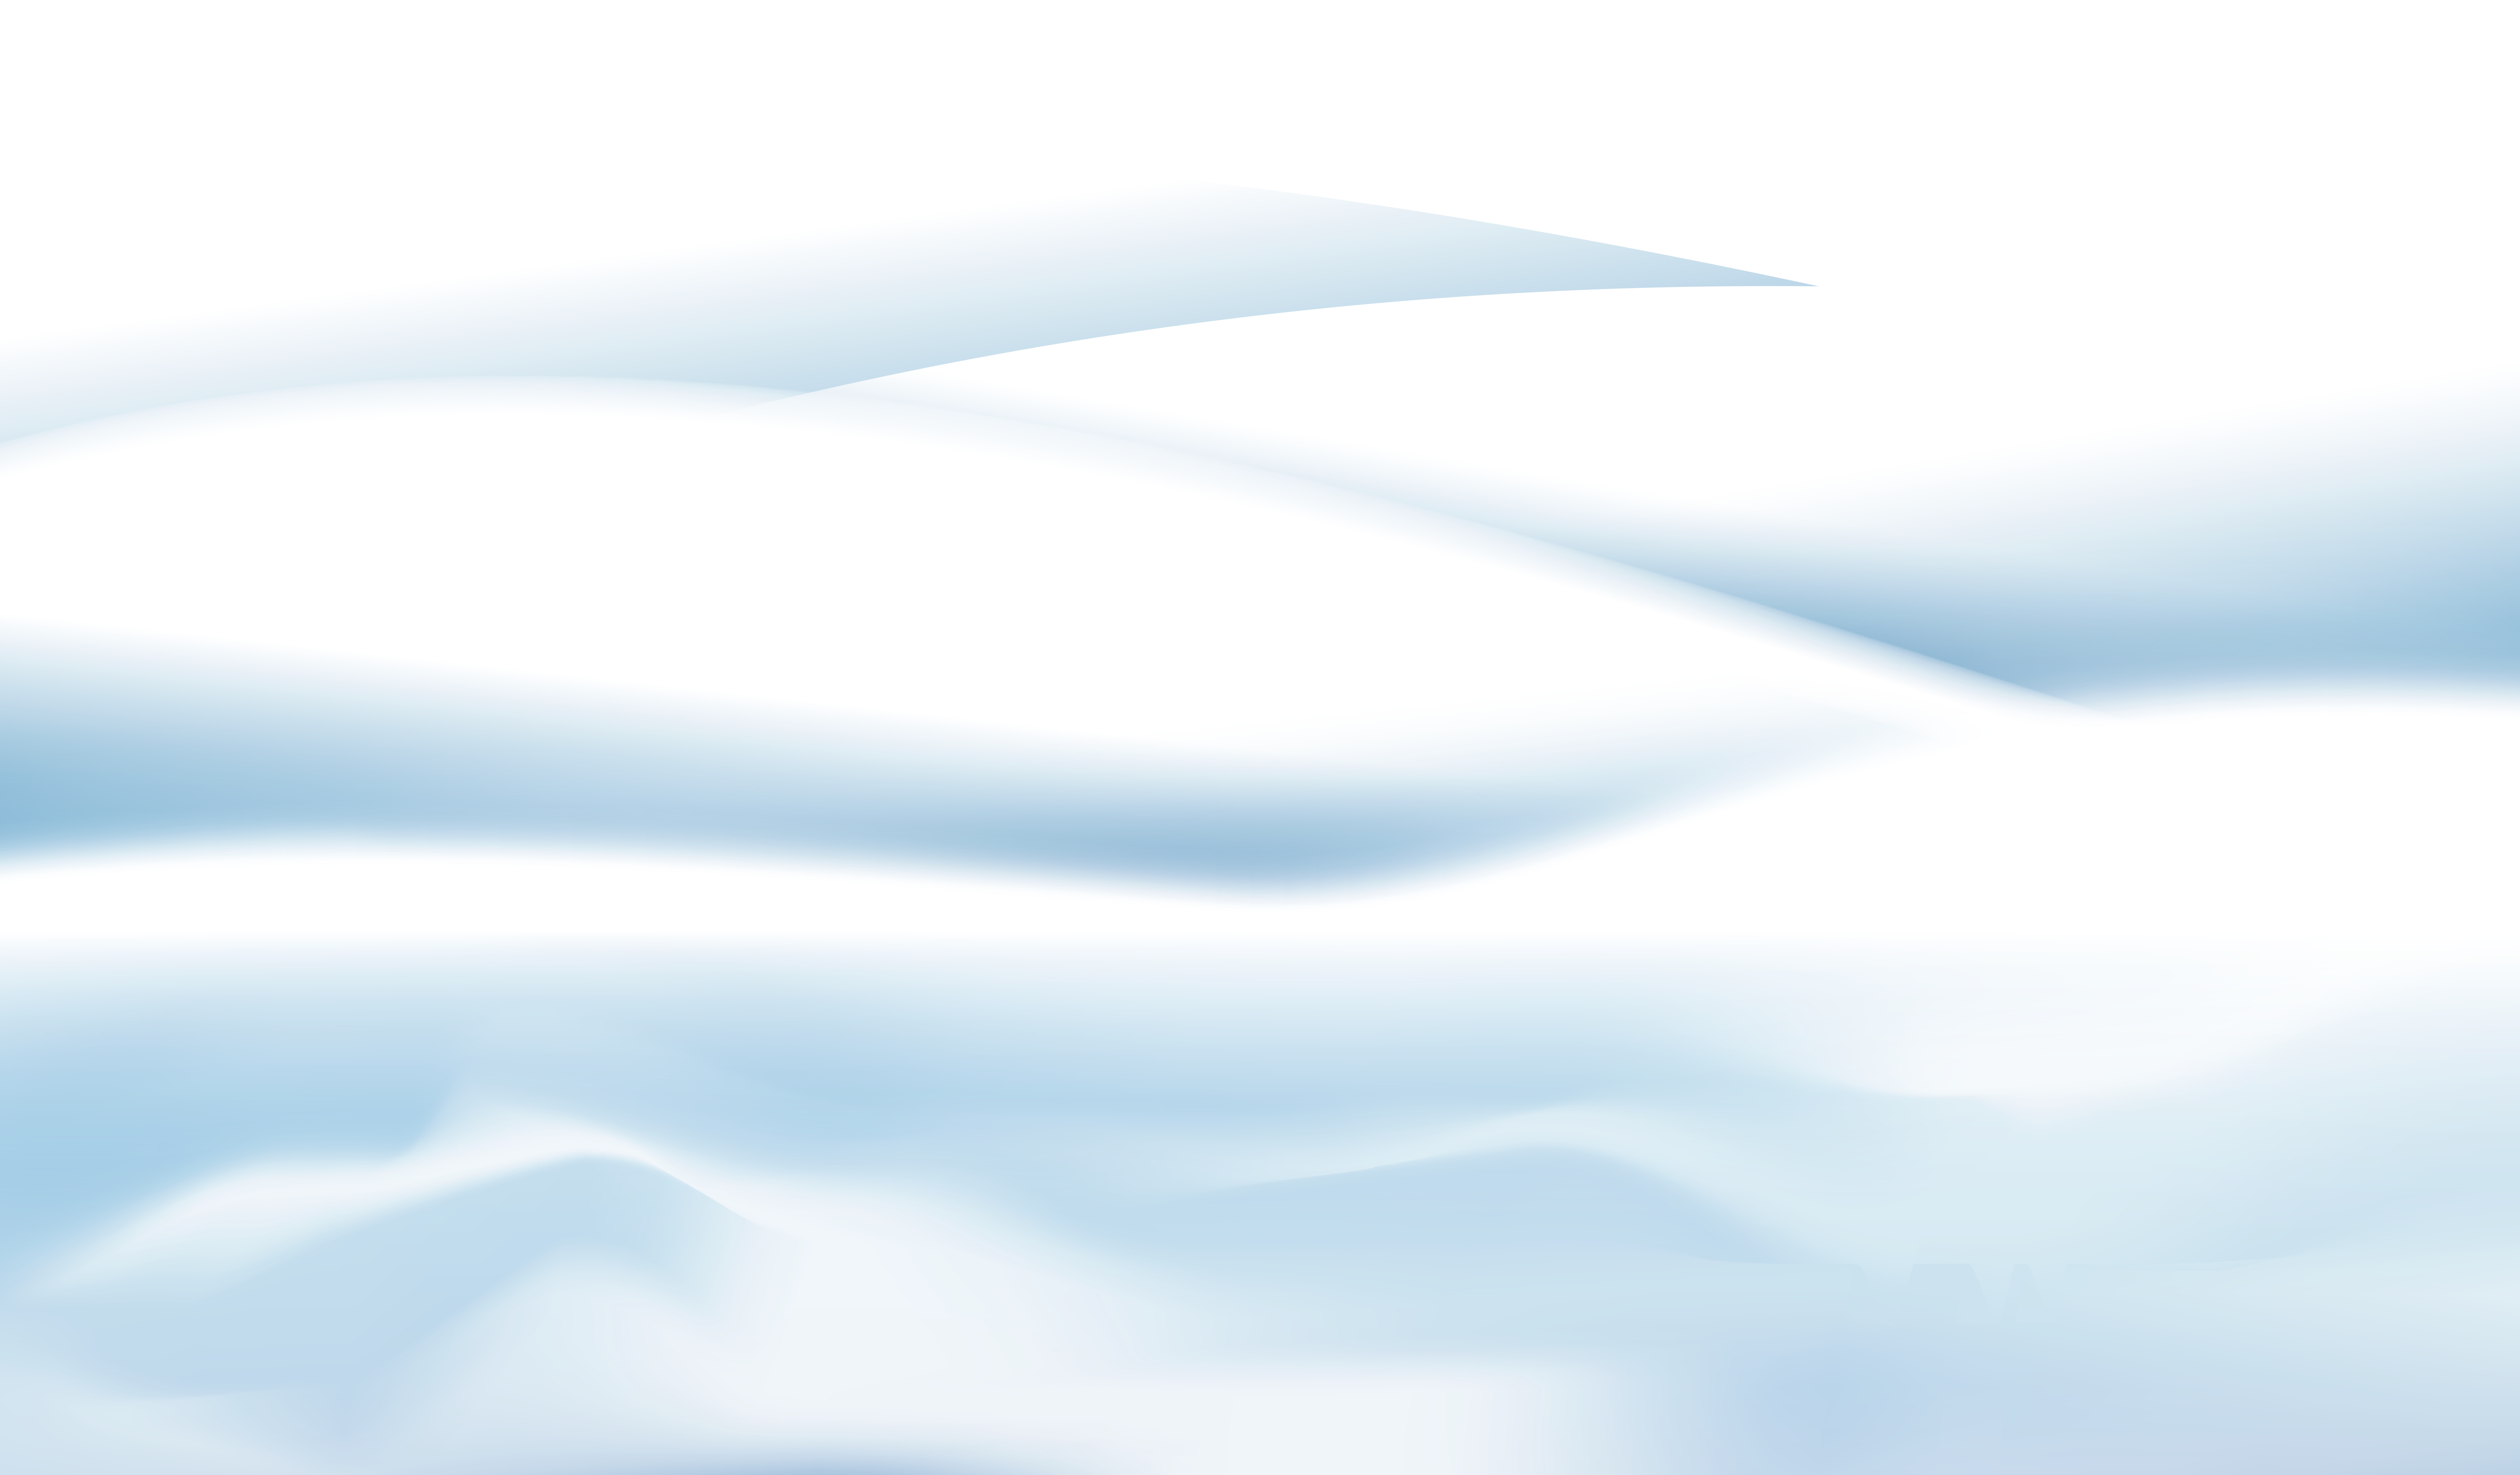 Snow Ground PNG Clipart Image